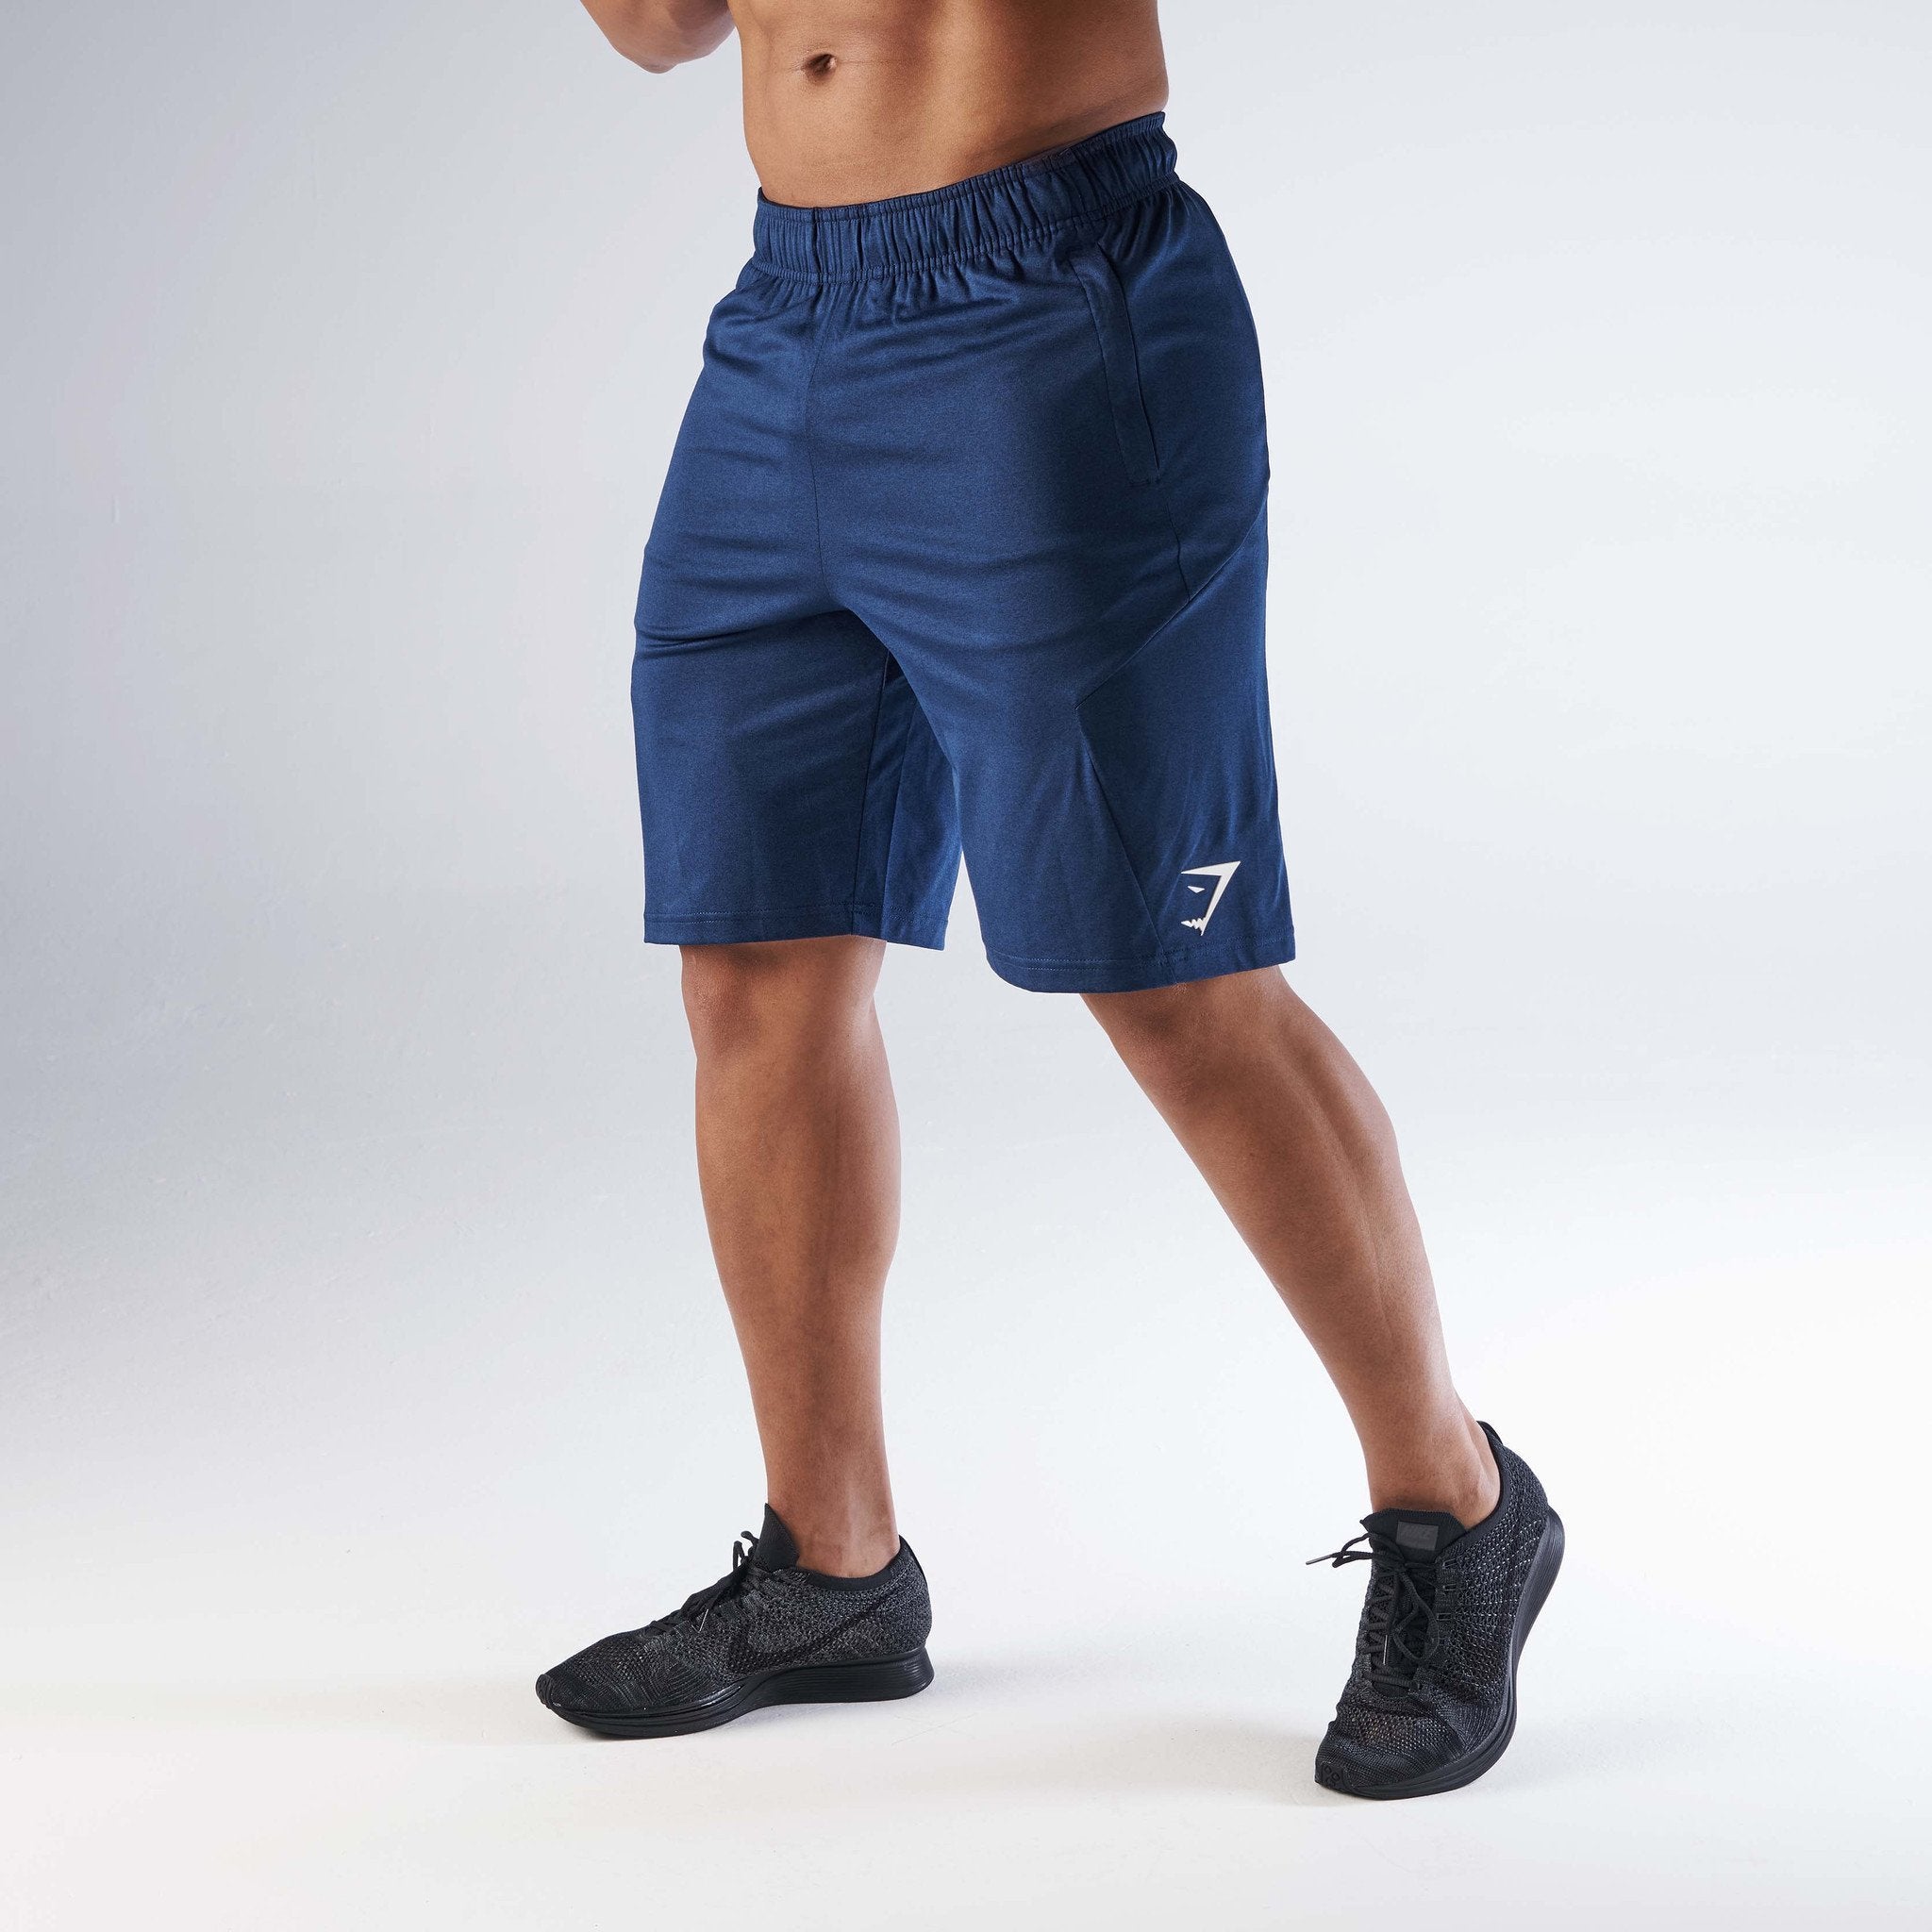 Element Shorts in Sapphire Blue Marl - view 3